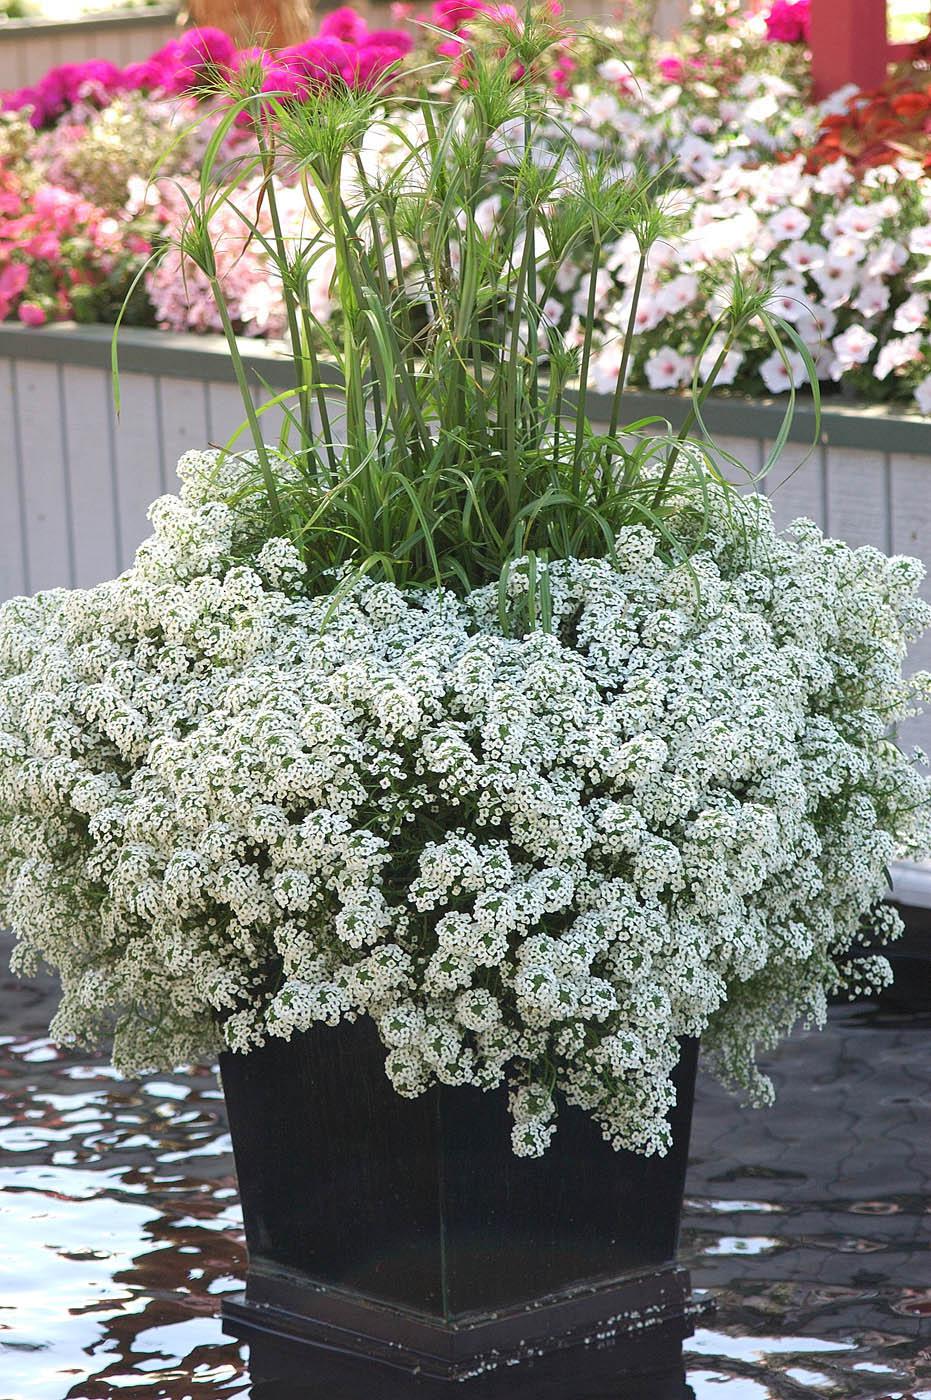 Snow Princess will dazzle in mixed containers, falling over the edge like a blanket of snow and giving off a sweet honey aroma. (Photos by Norman Winter)